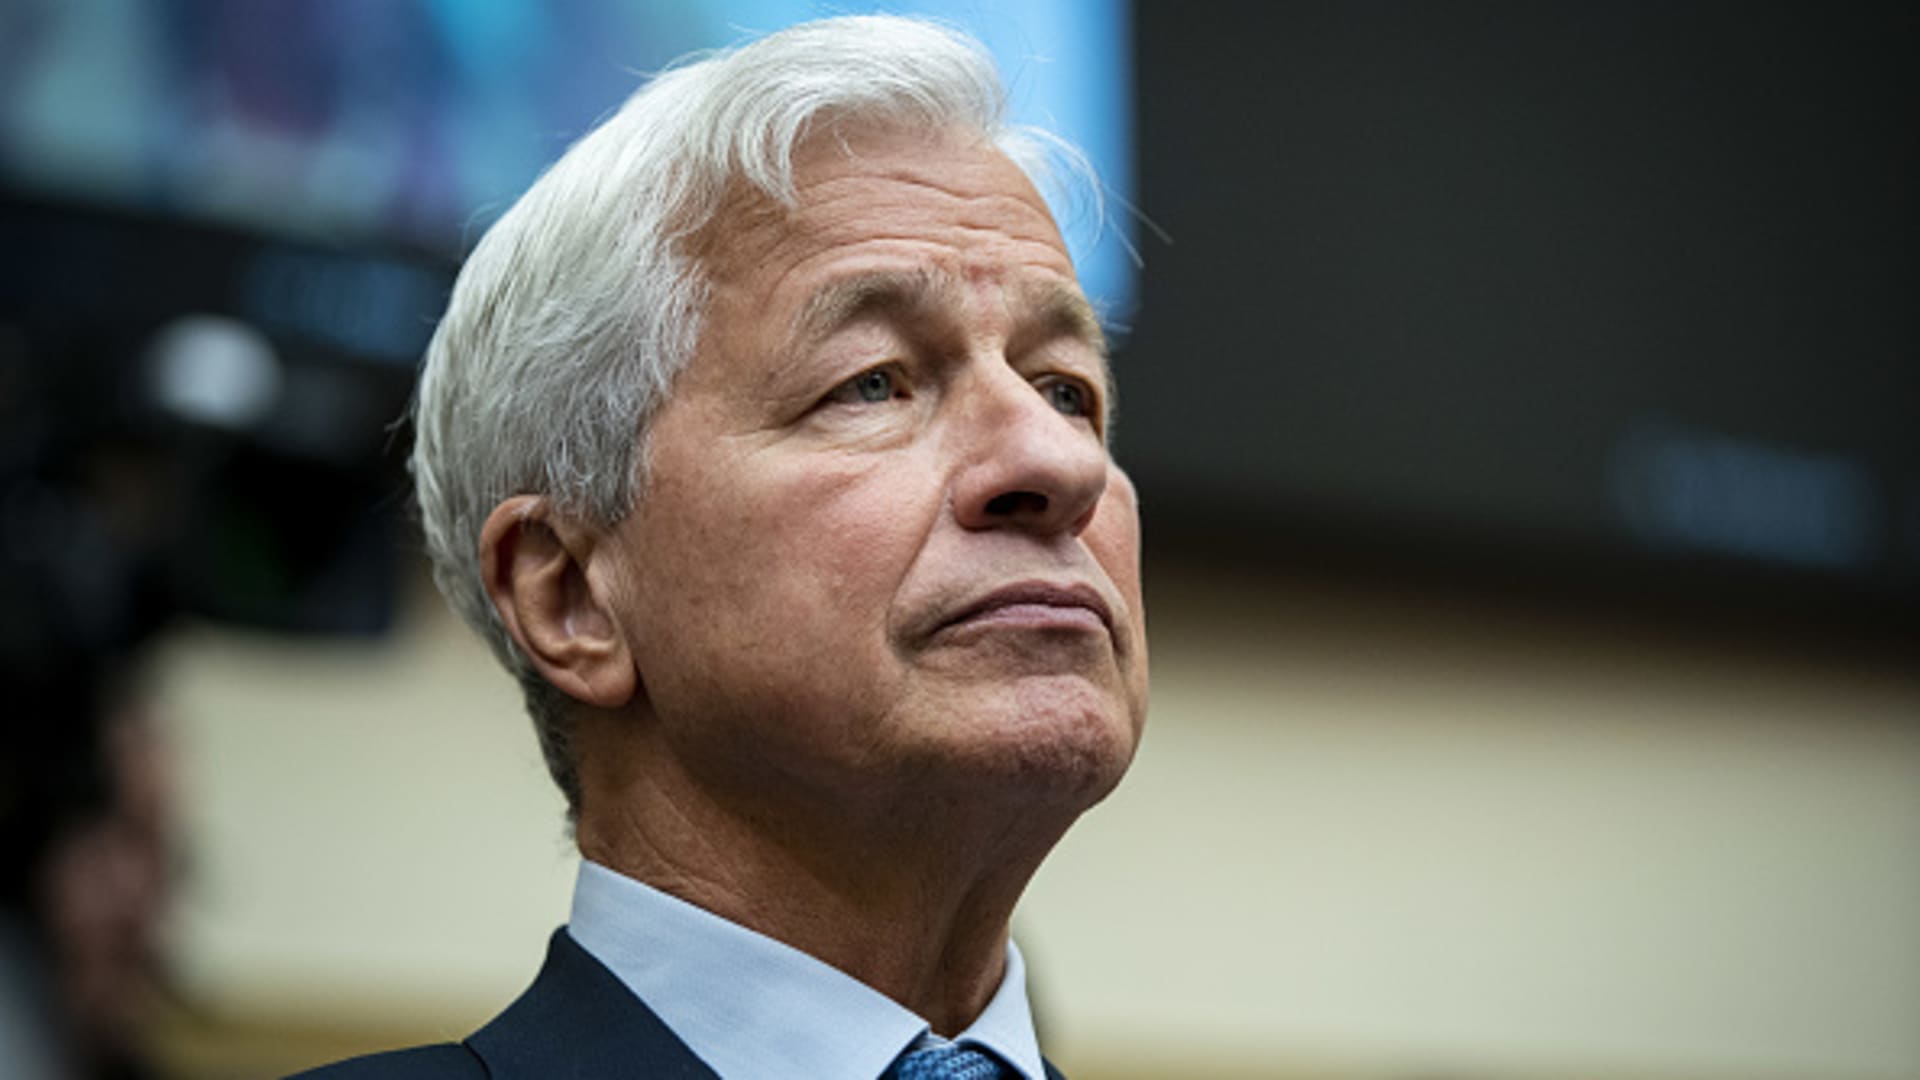 Jamie Dimon says UK government deserves benefit of the doubt after sparking market turmoil – CNBC